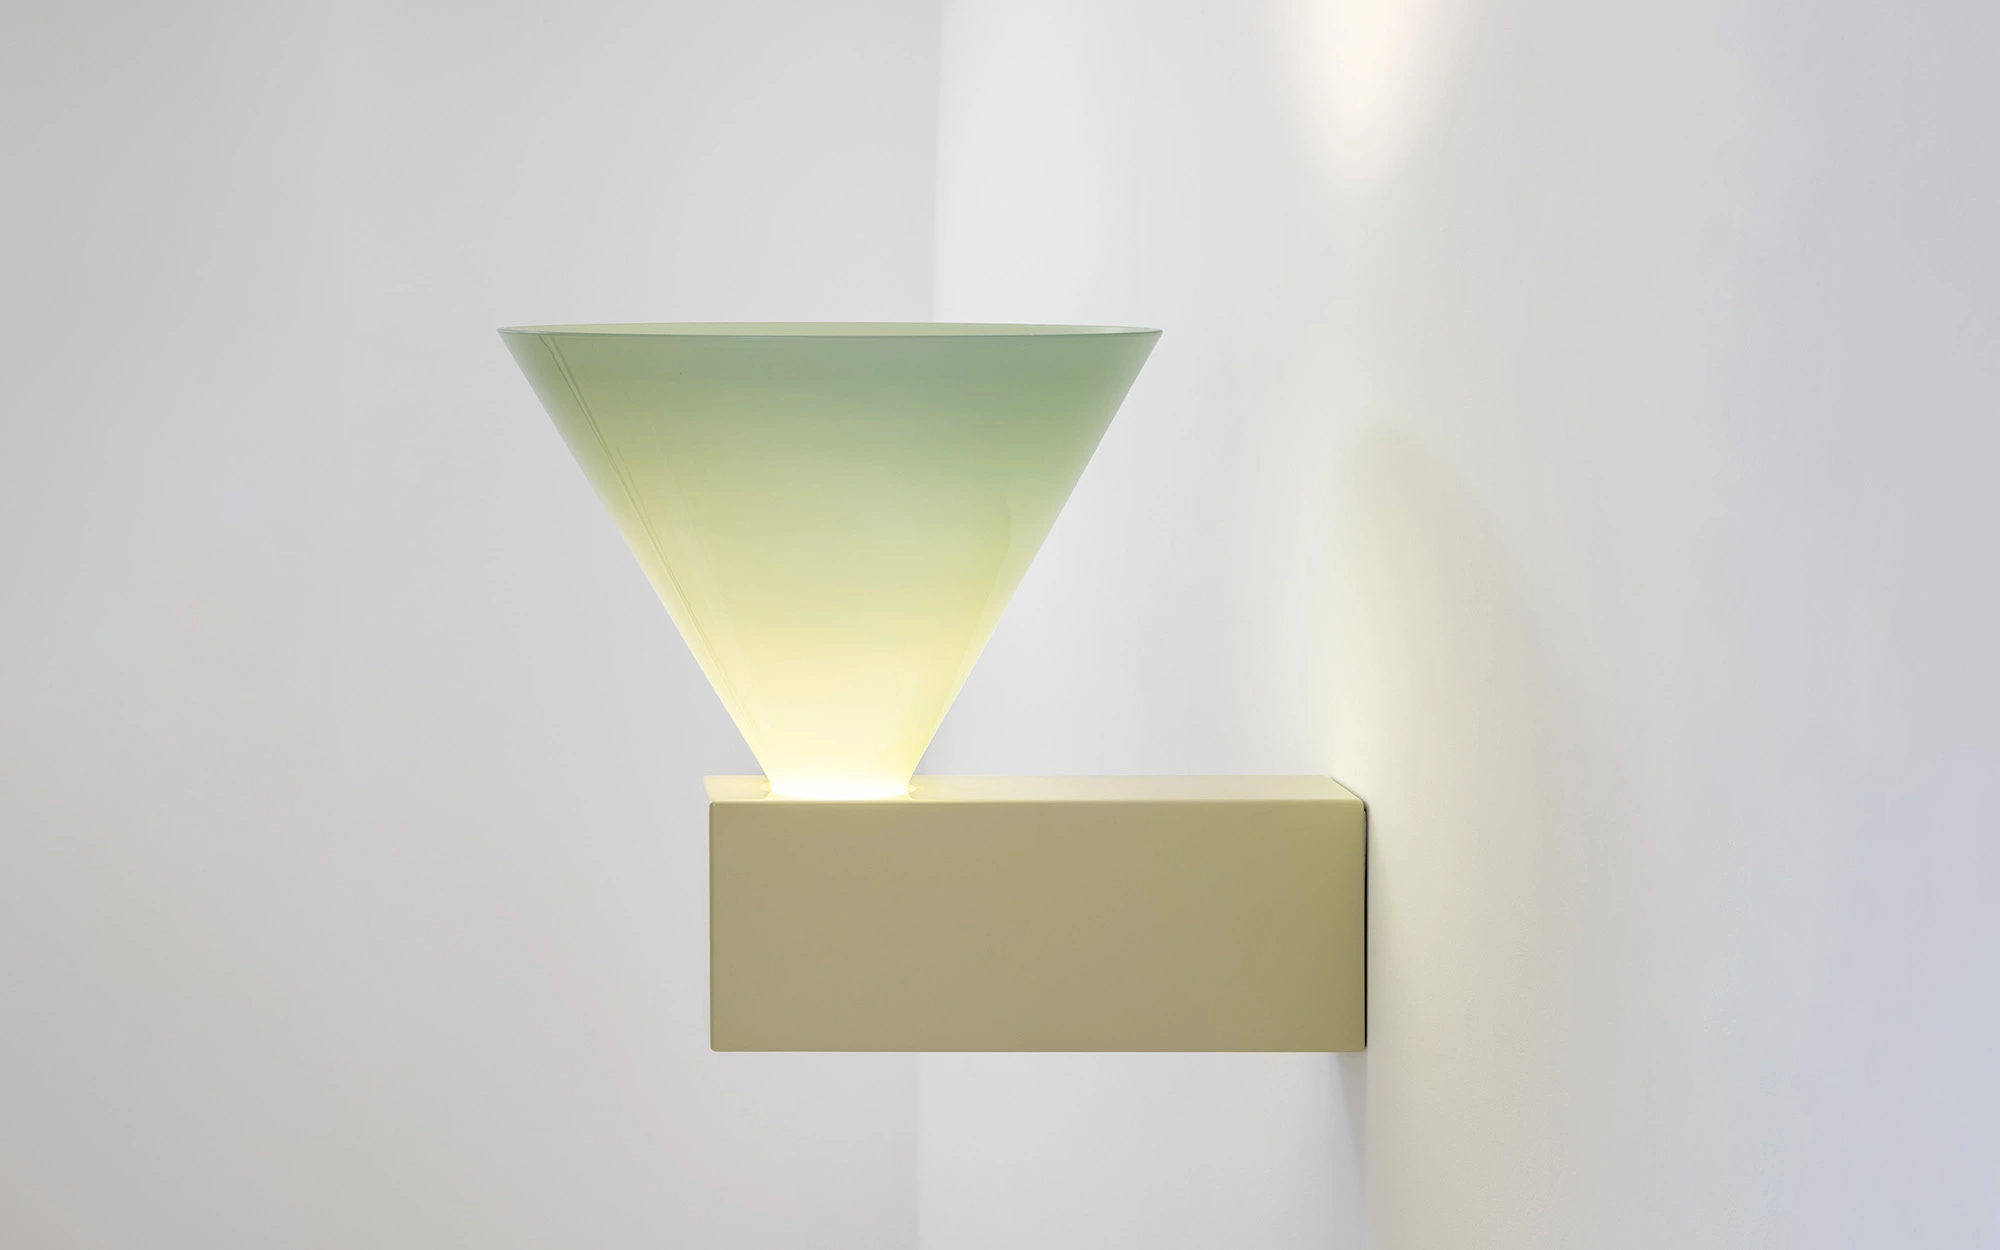 Signal W MONOCHROMATIC - Edward and Jay Barber and Osgerby - wall-light - Galerie kreo